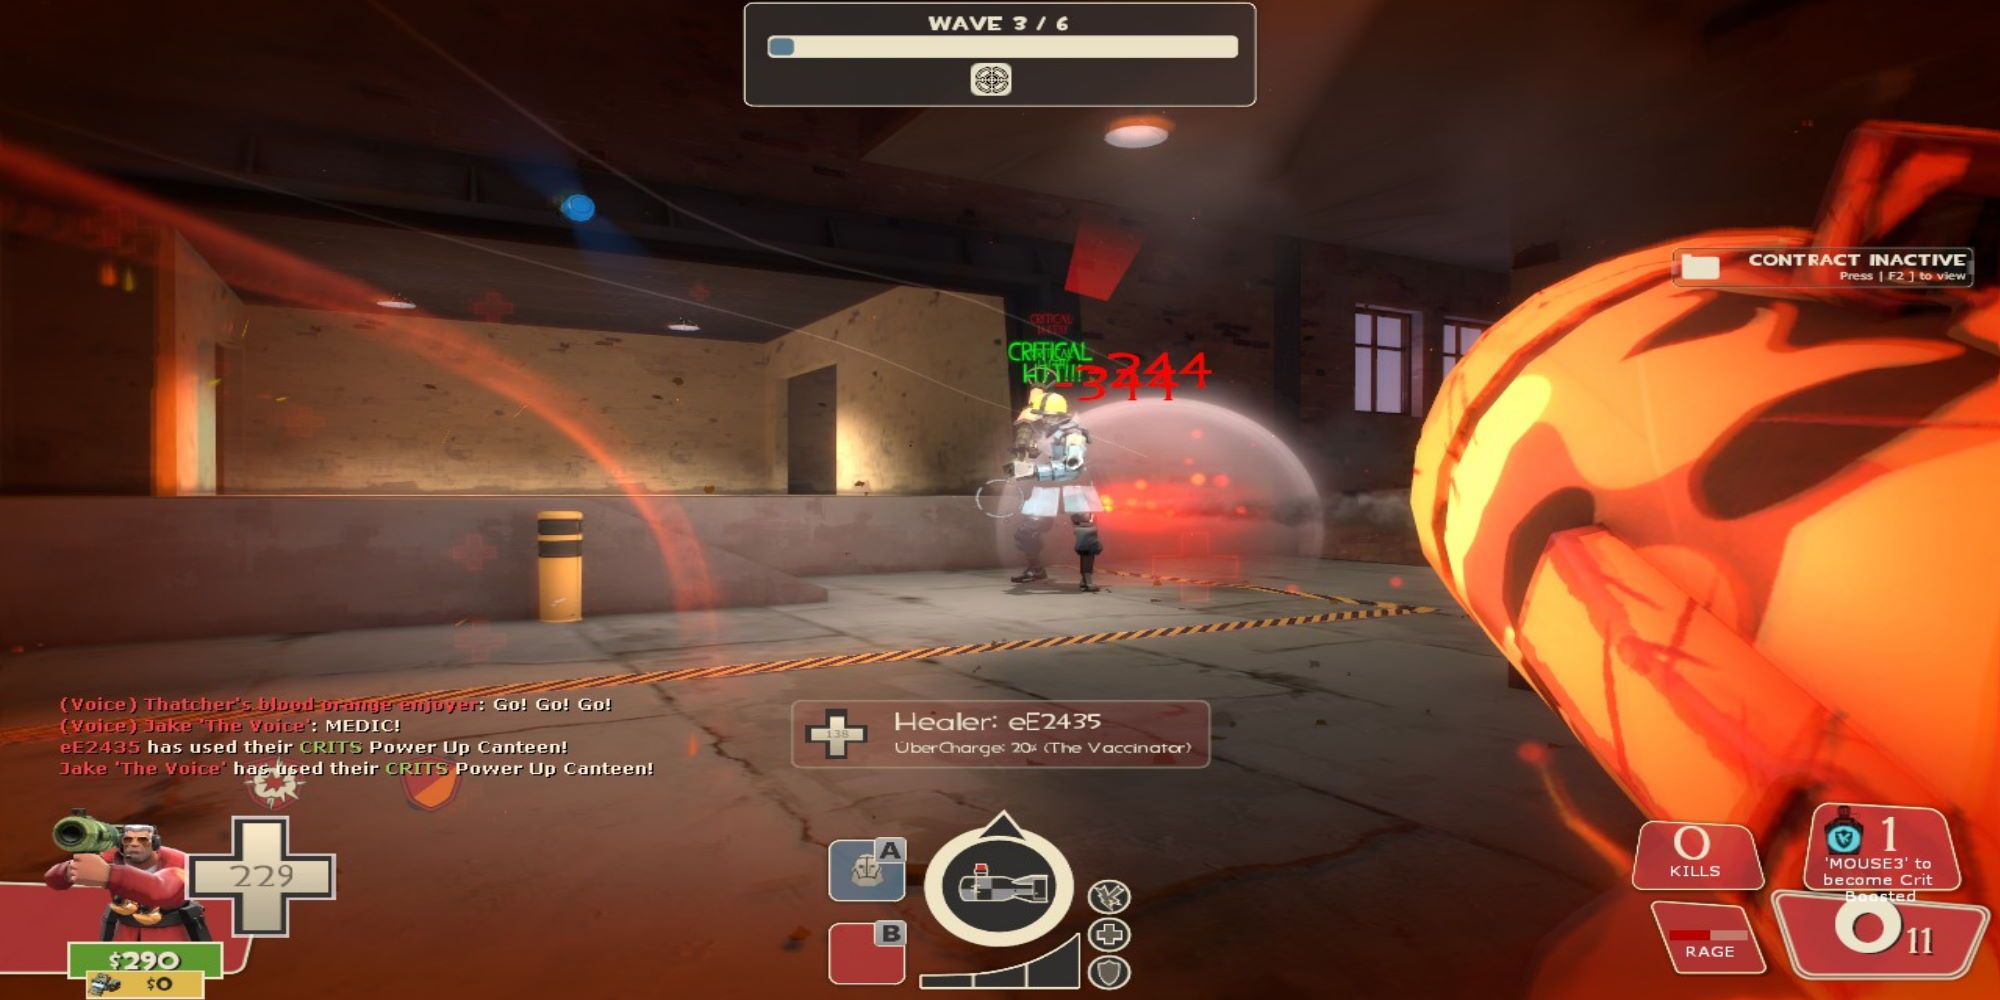 Soldier firing a glowing bazooka at a giant robot Soldier, while being healed, and causing a shockwave in Team Fortress 2